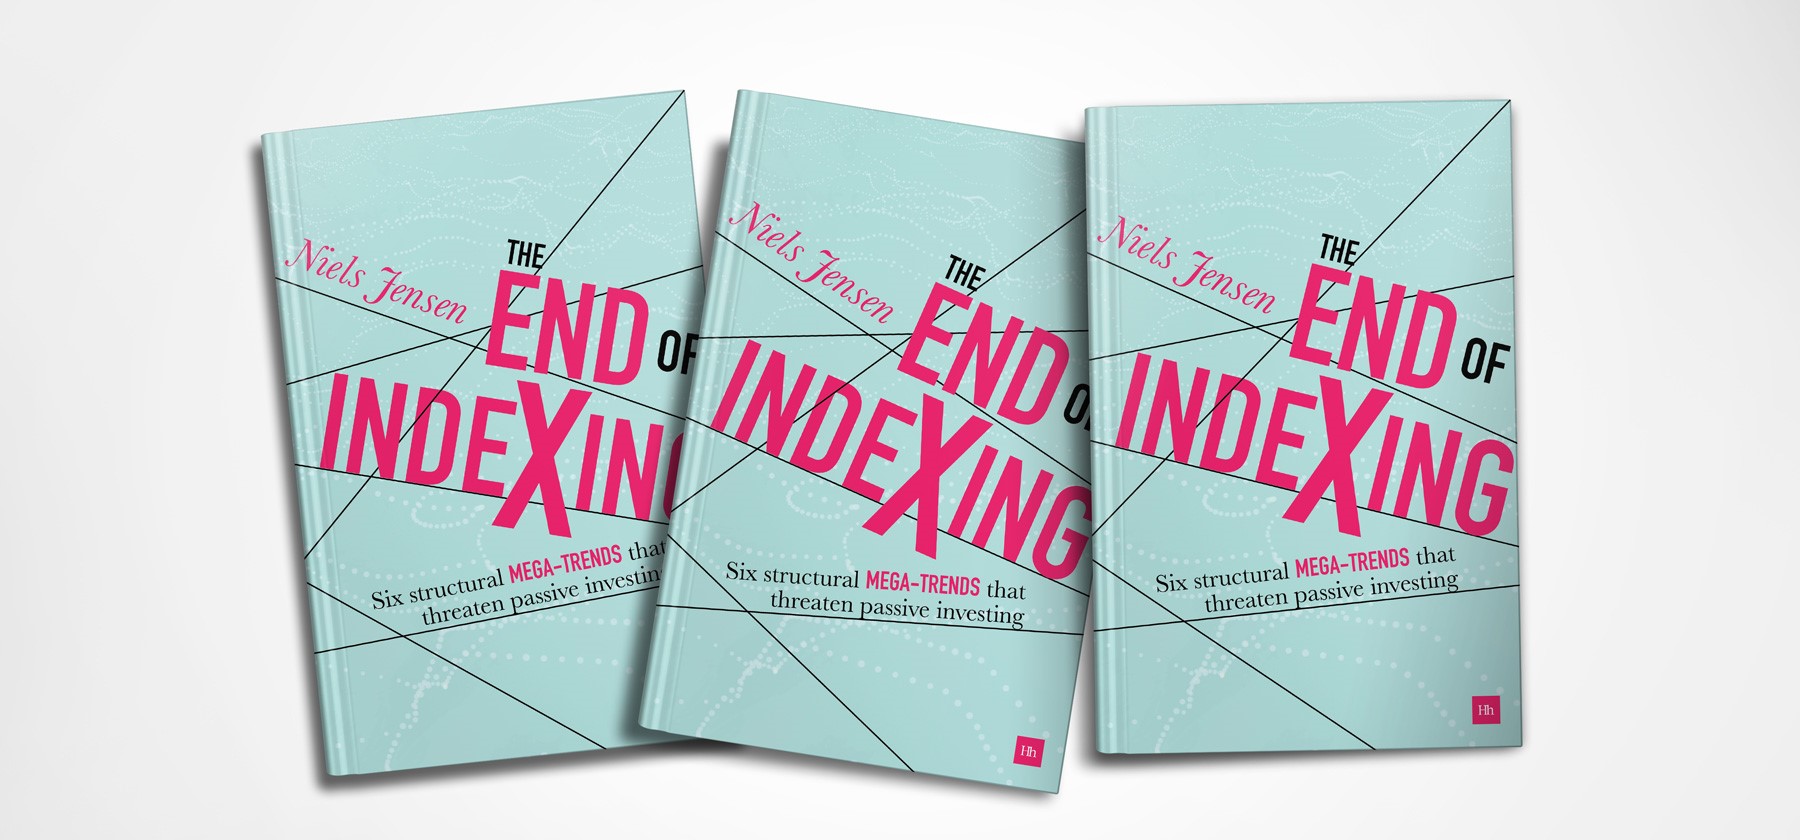 Exhibit 2:	The front cover of The End of Indexing